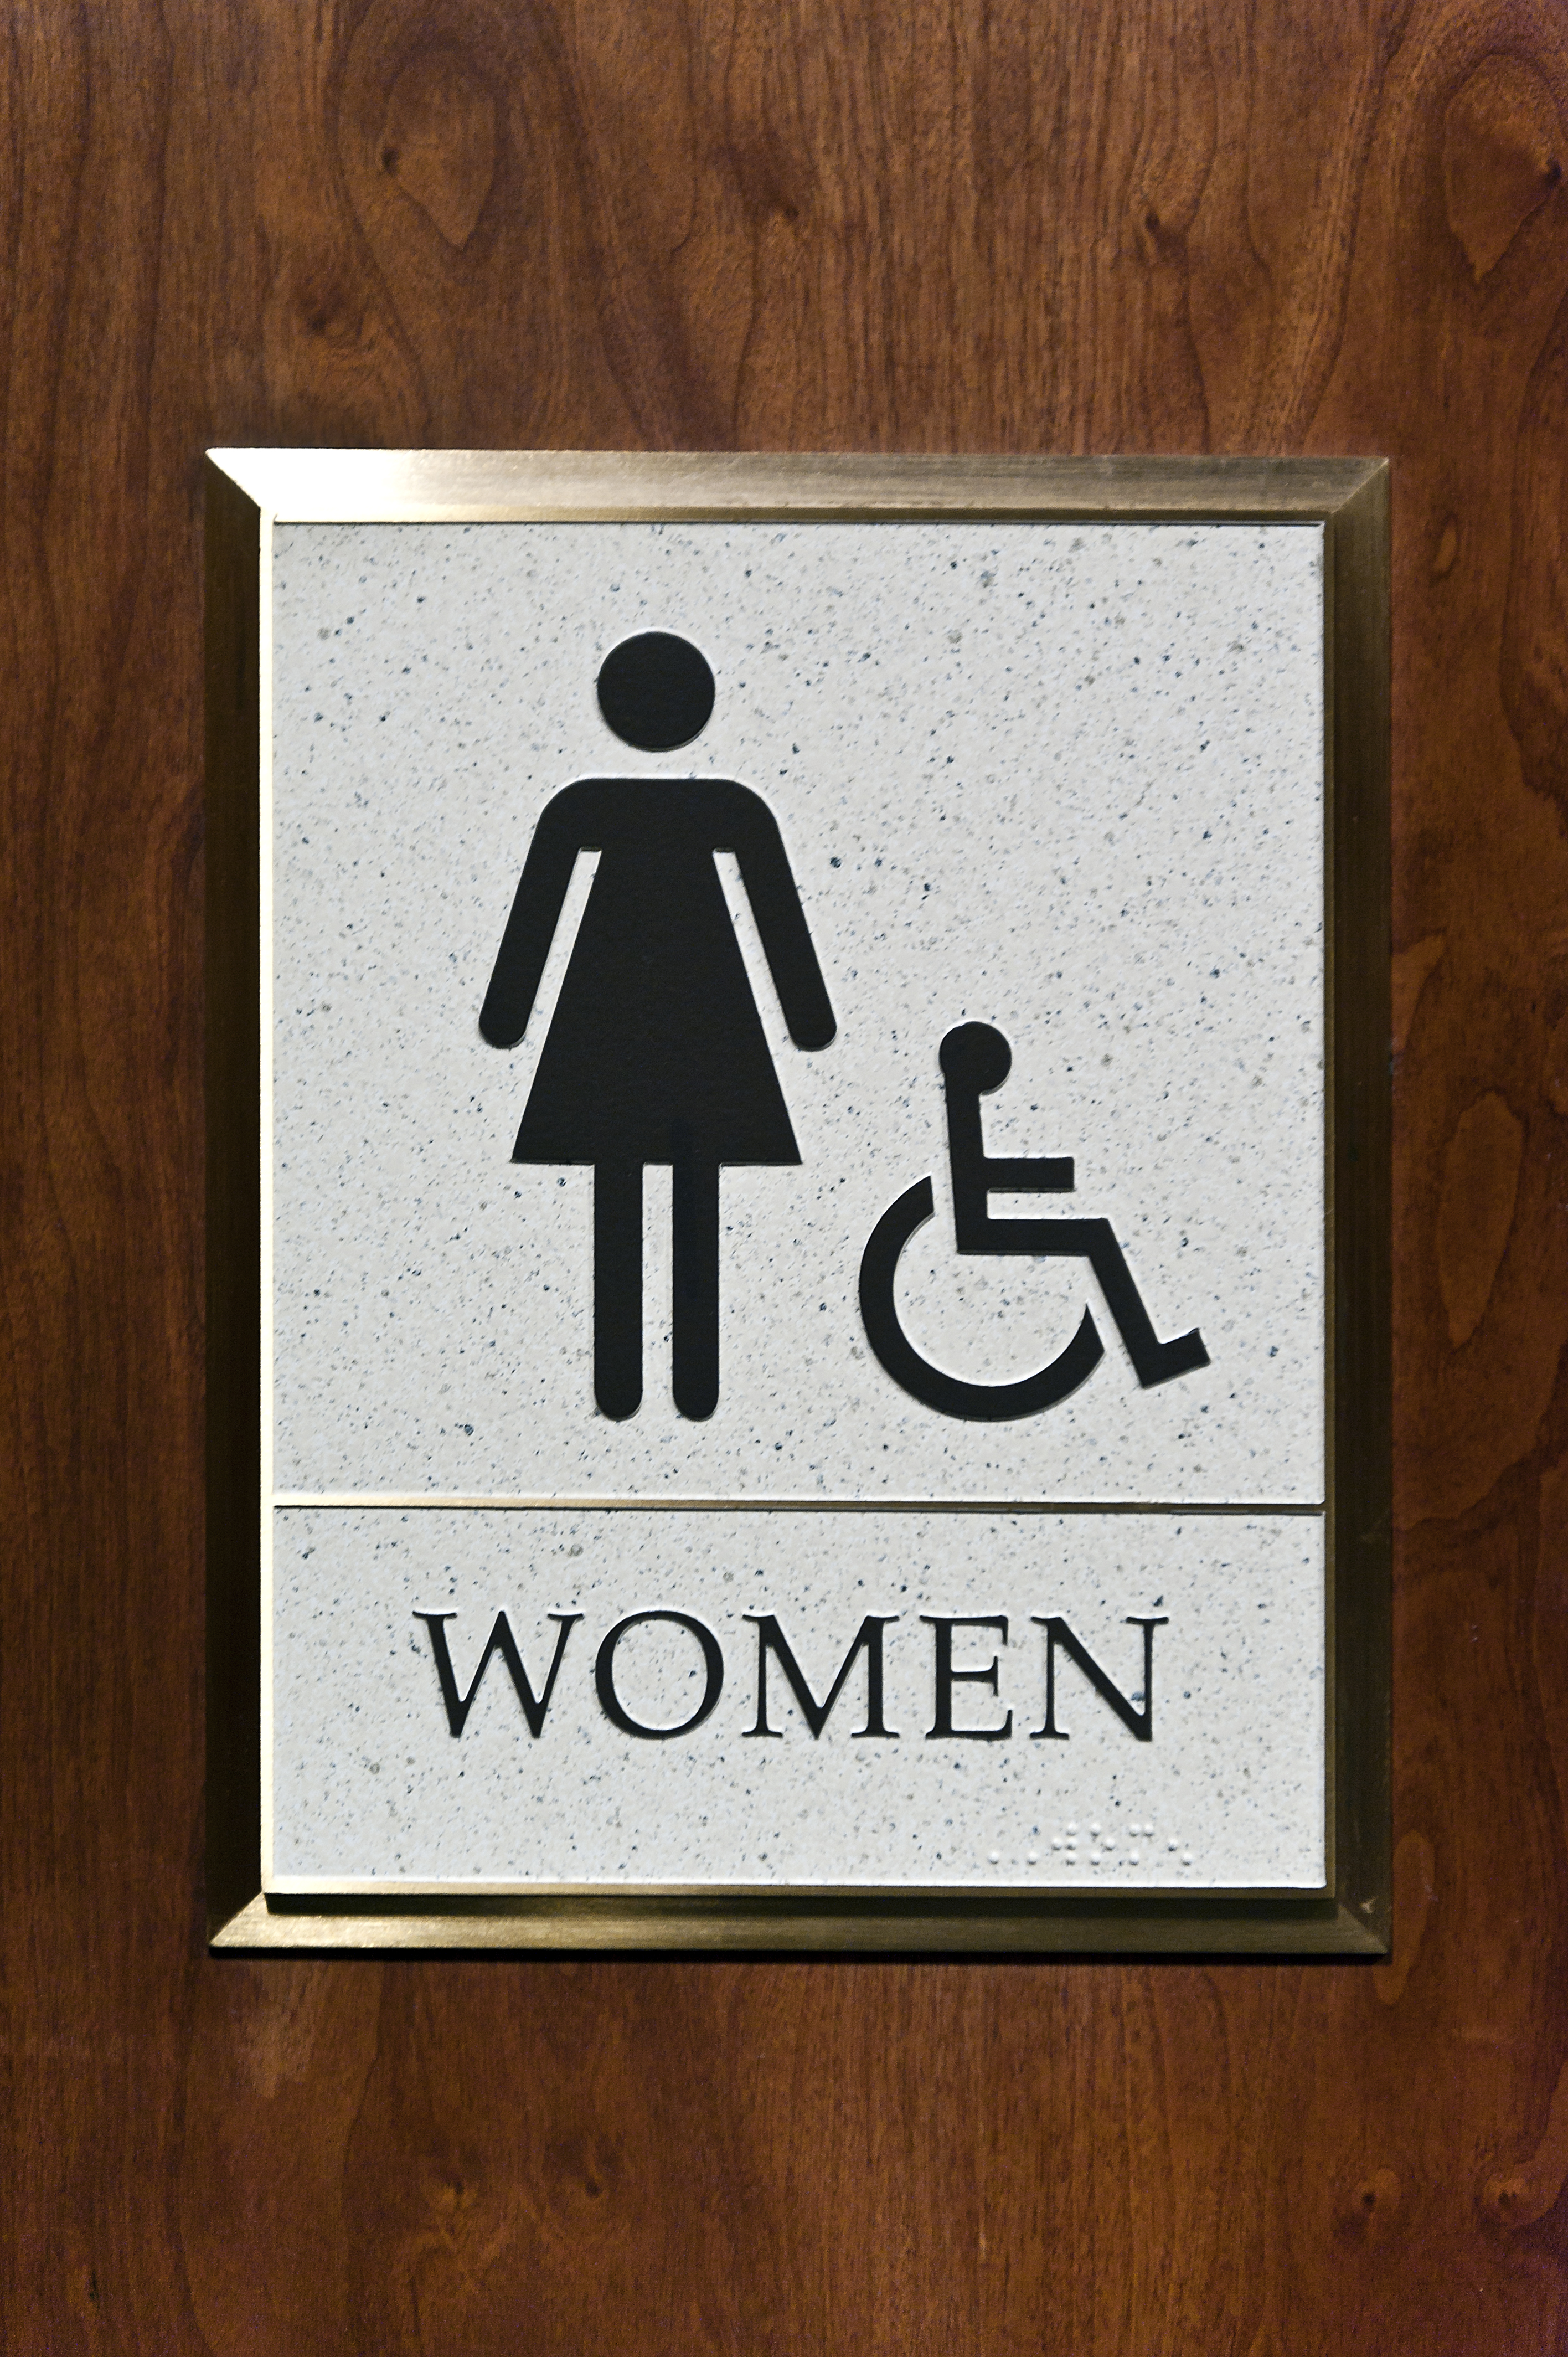 Woman's Restroom Sign (John Greim—Getty Images)